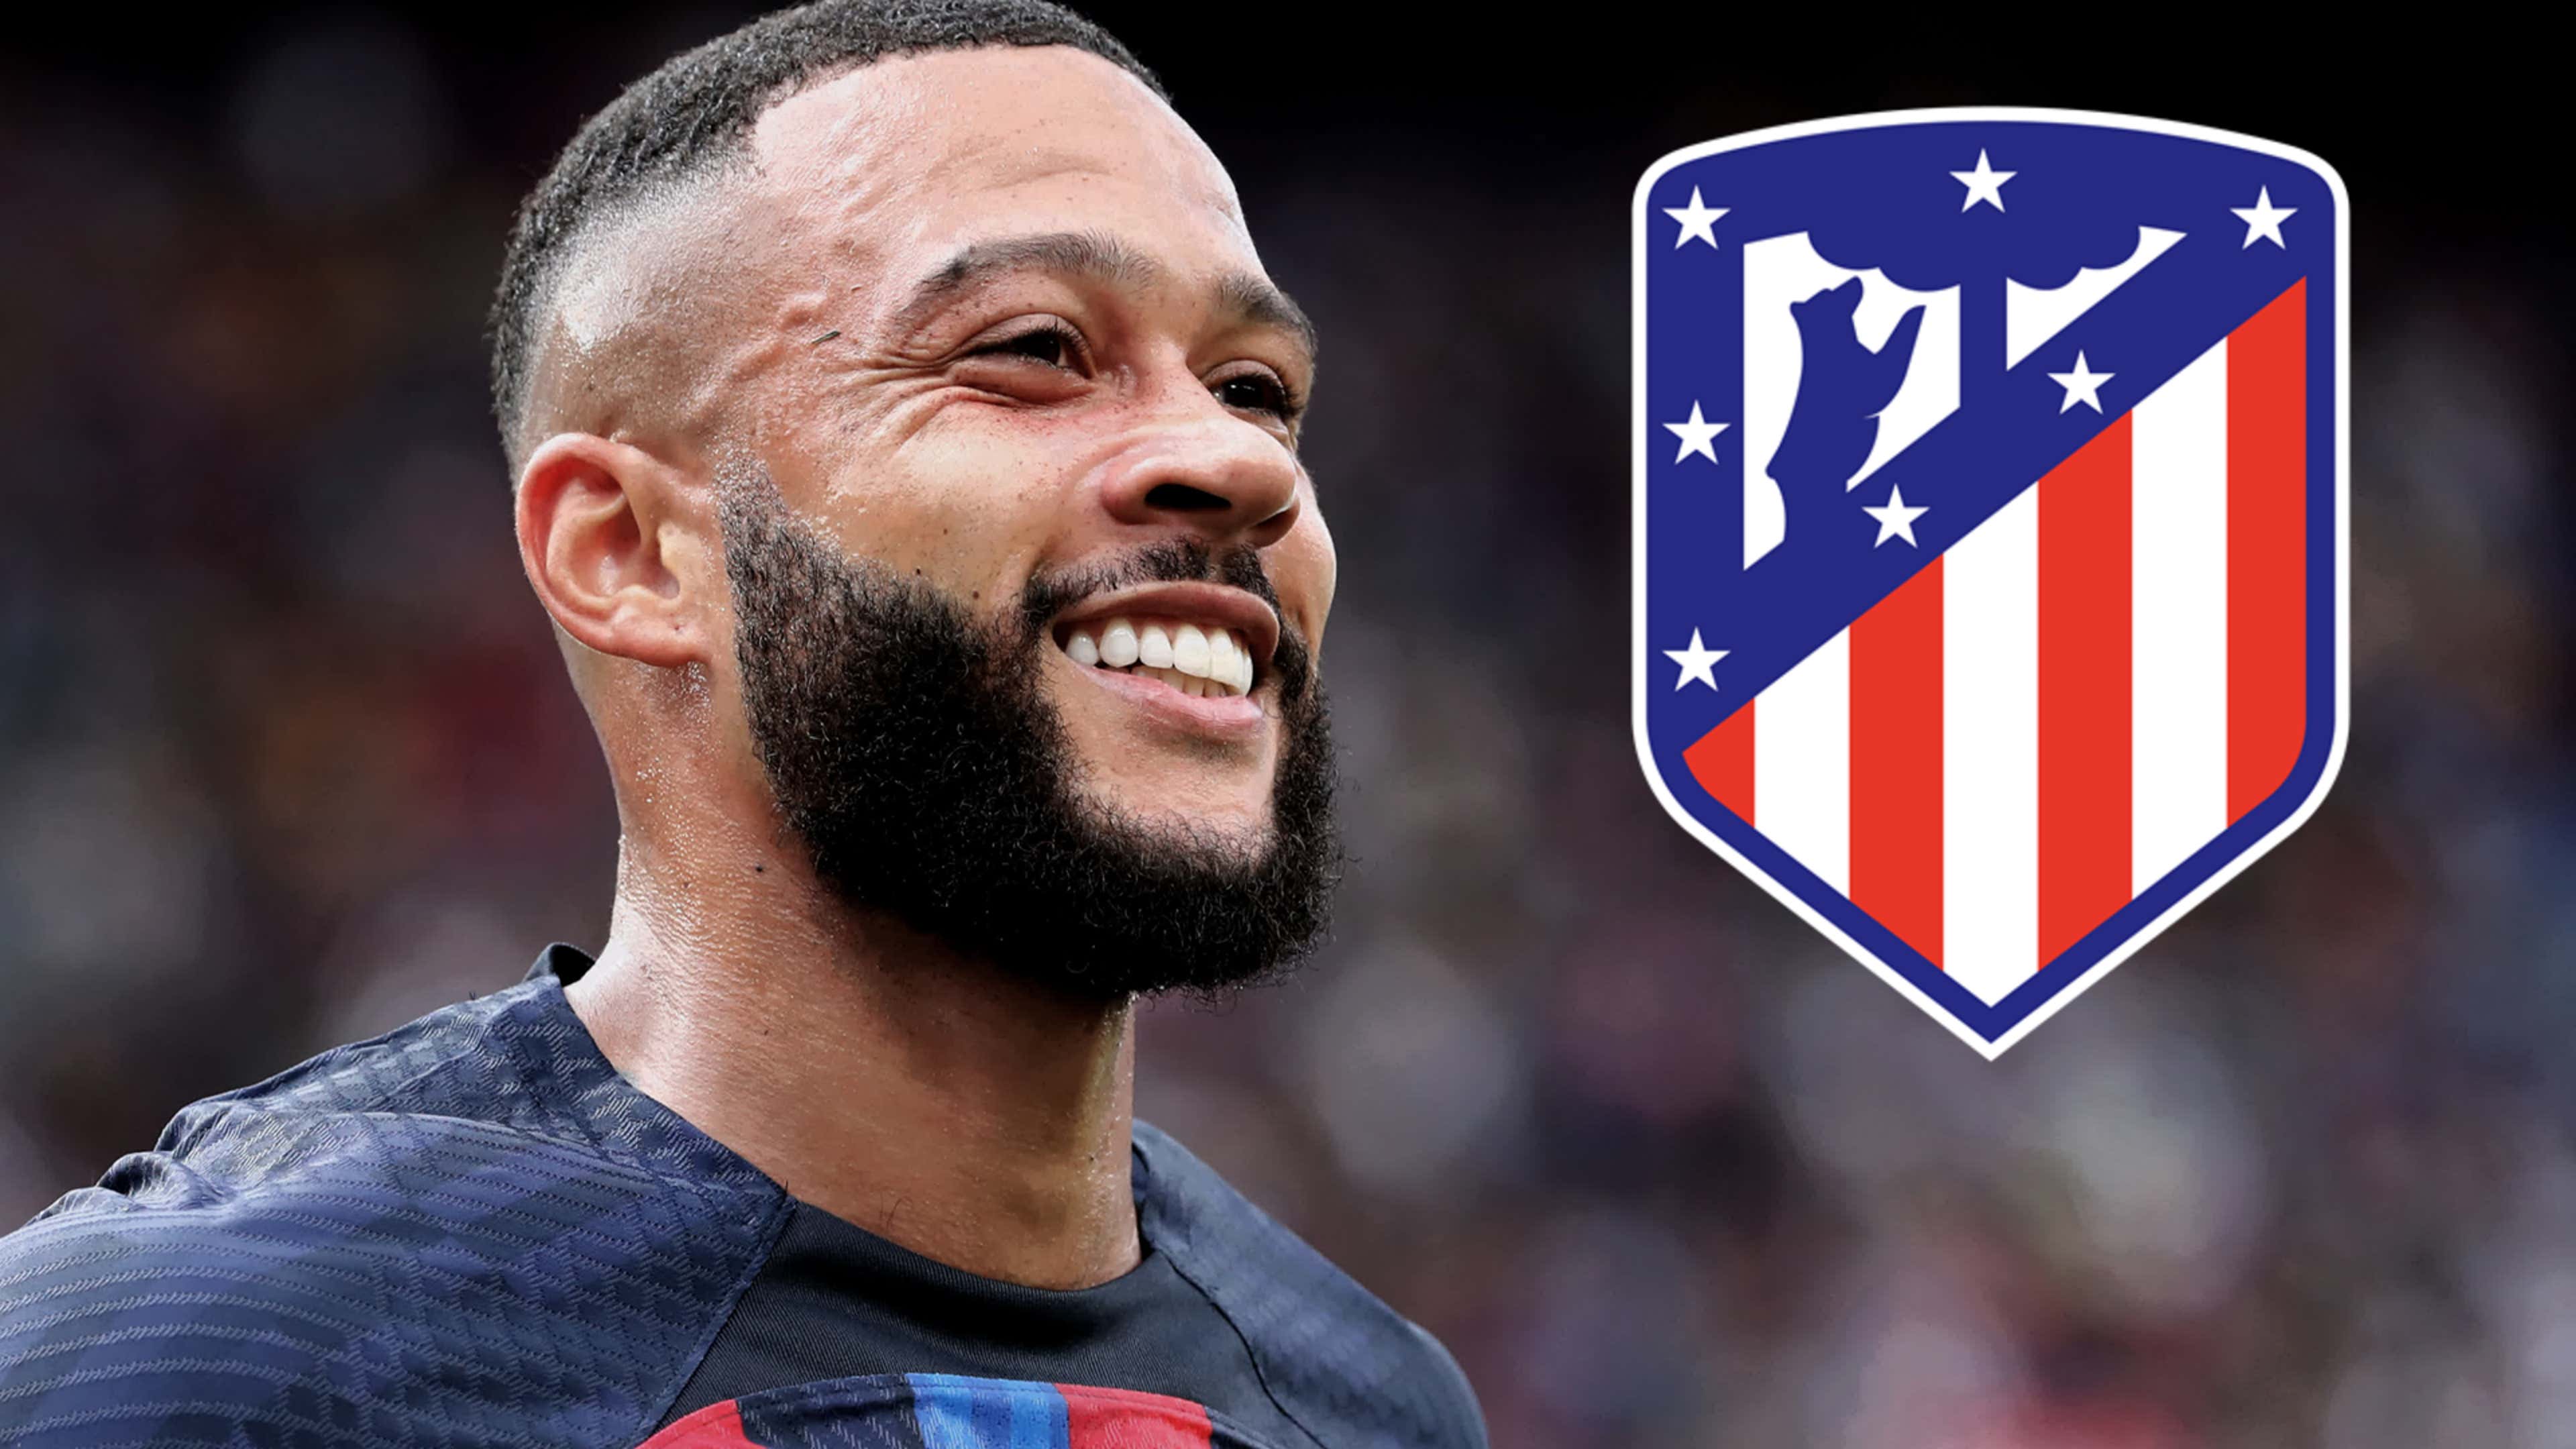 OFICIAL: Memphis completes €3 million transfer to Atlético Madrid - Into  the Calderon